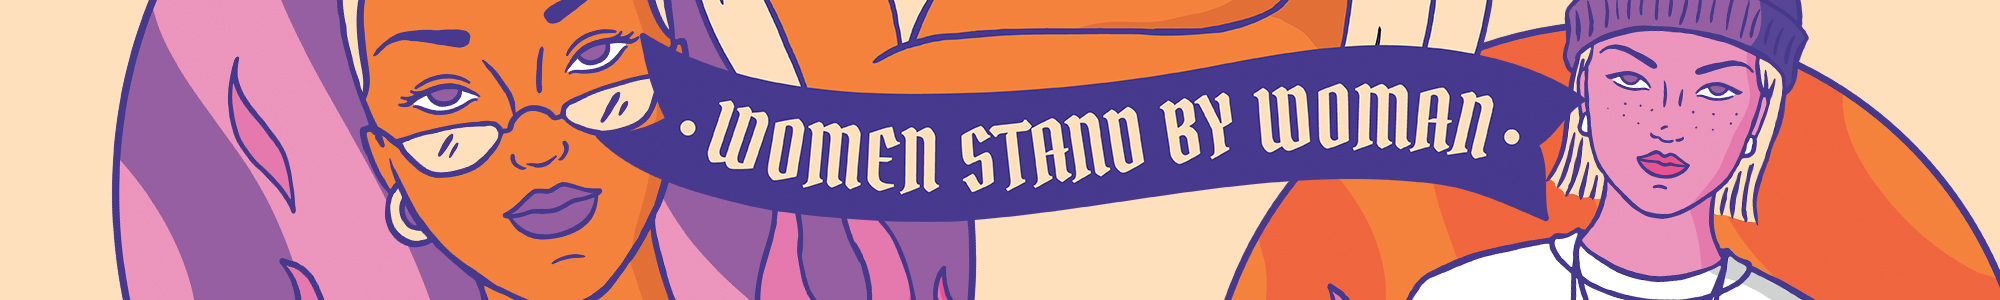 cropped womanstandwoman